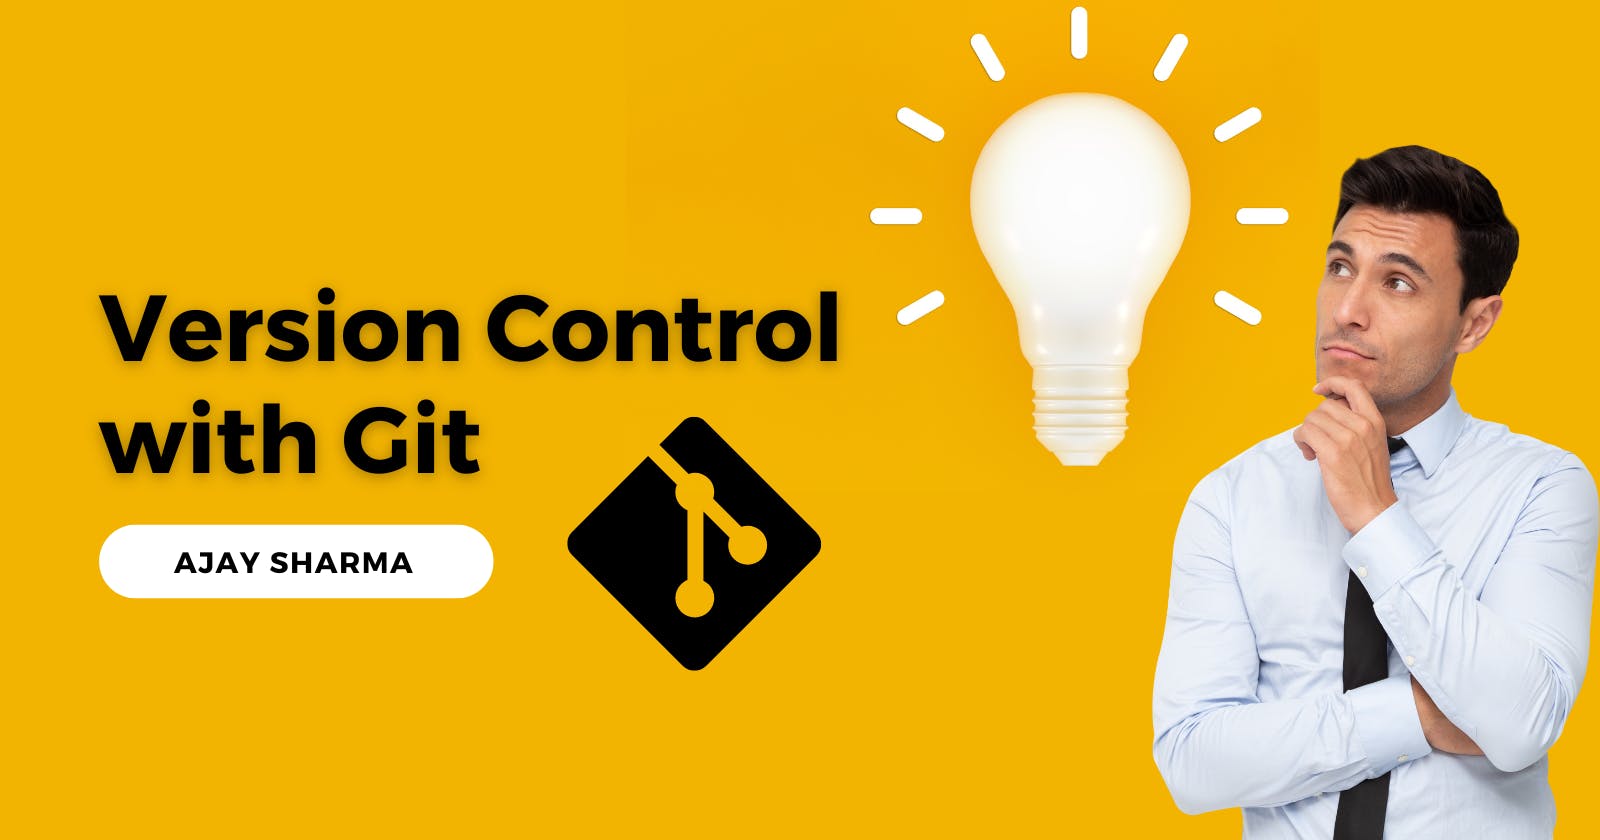 Version Control with Git: Tips and Tricks